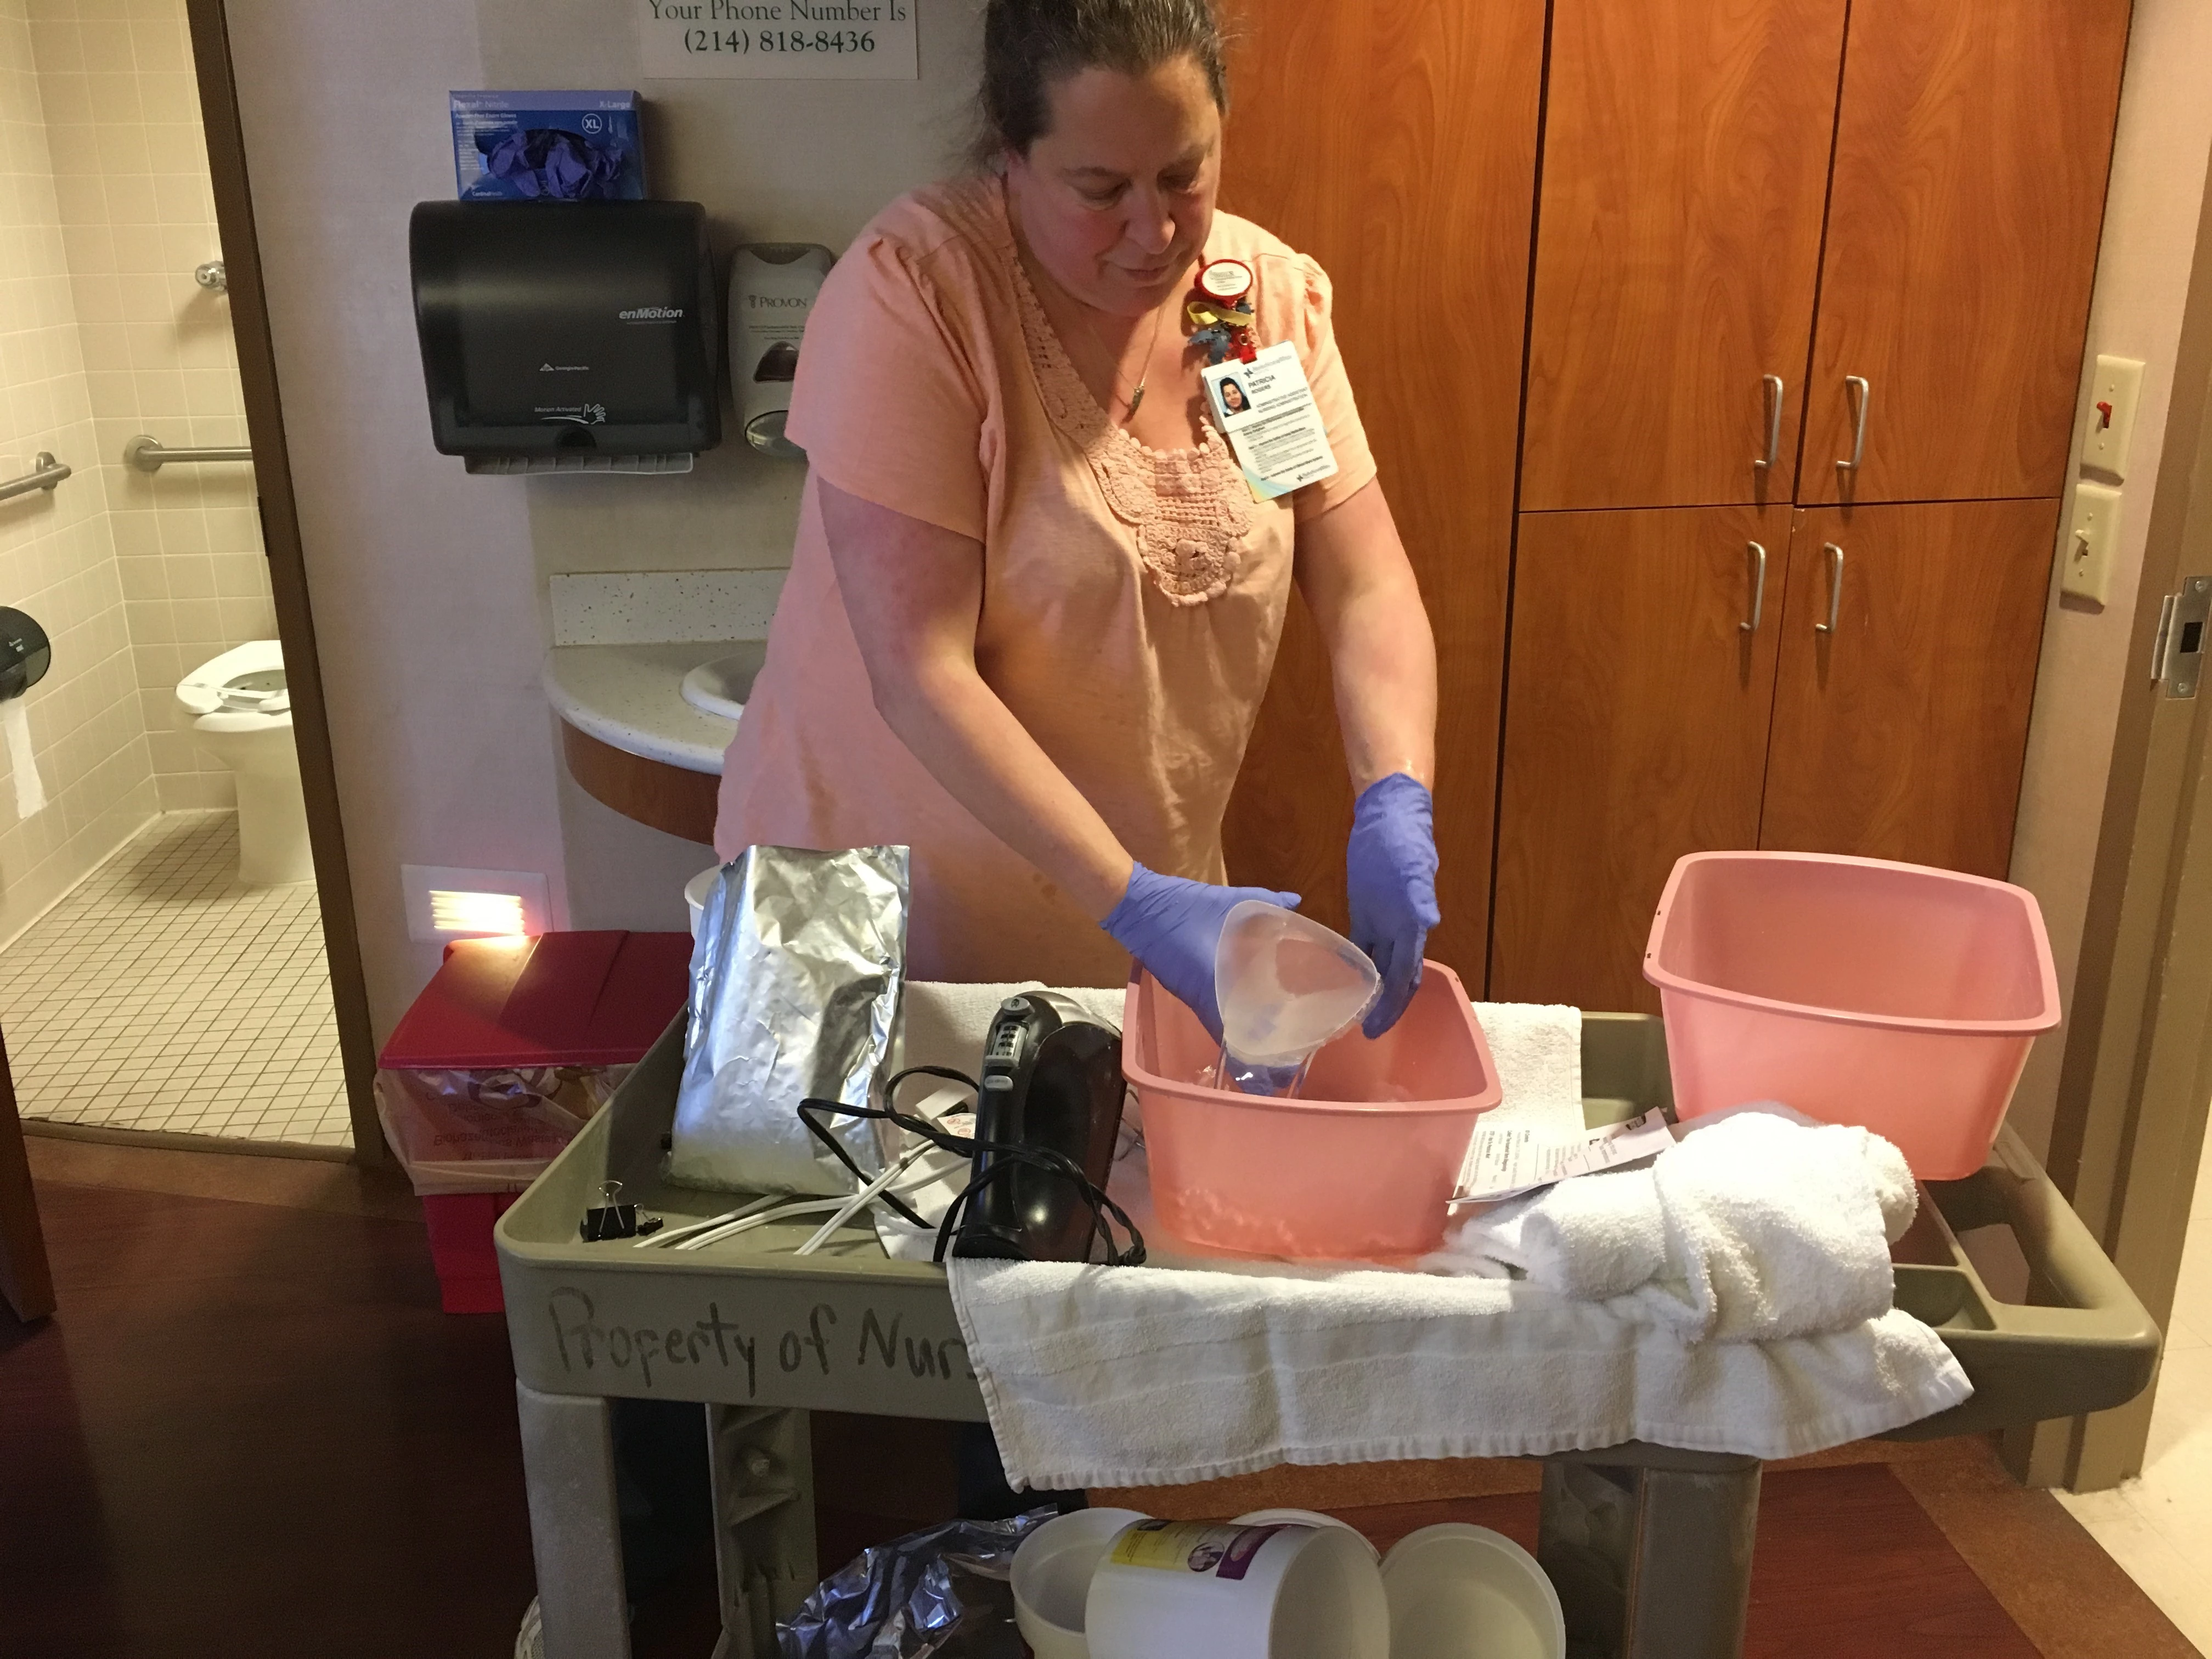 Hand castings of critically ill patients provide comfort to families